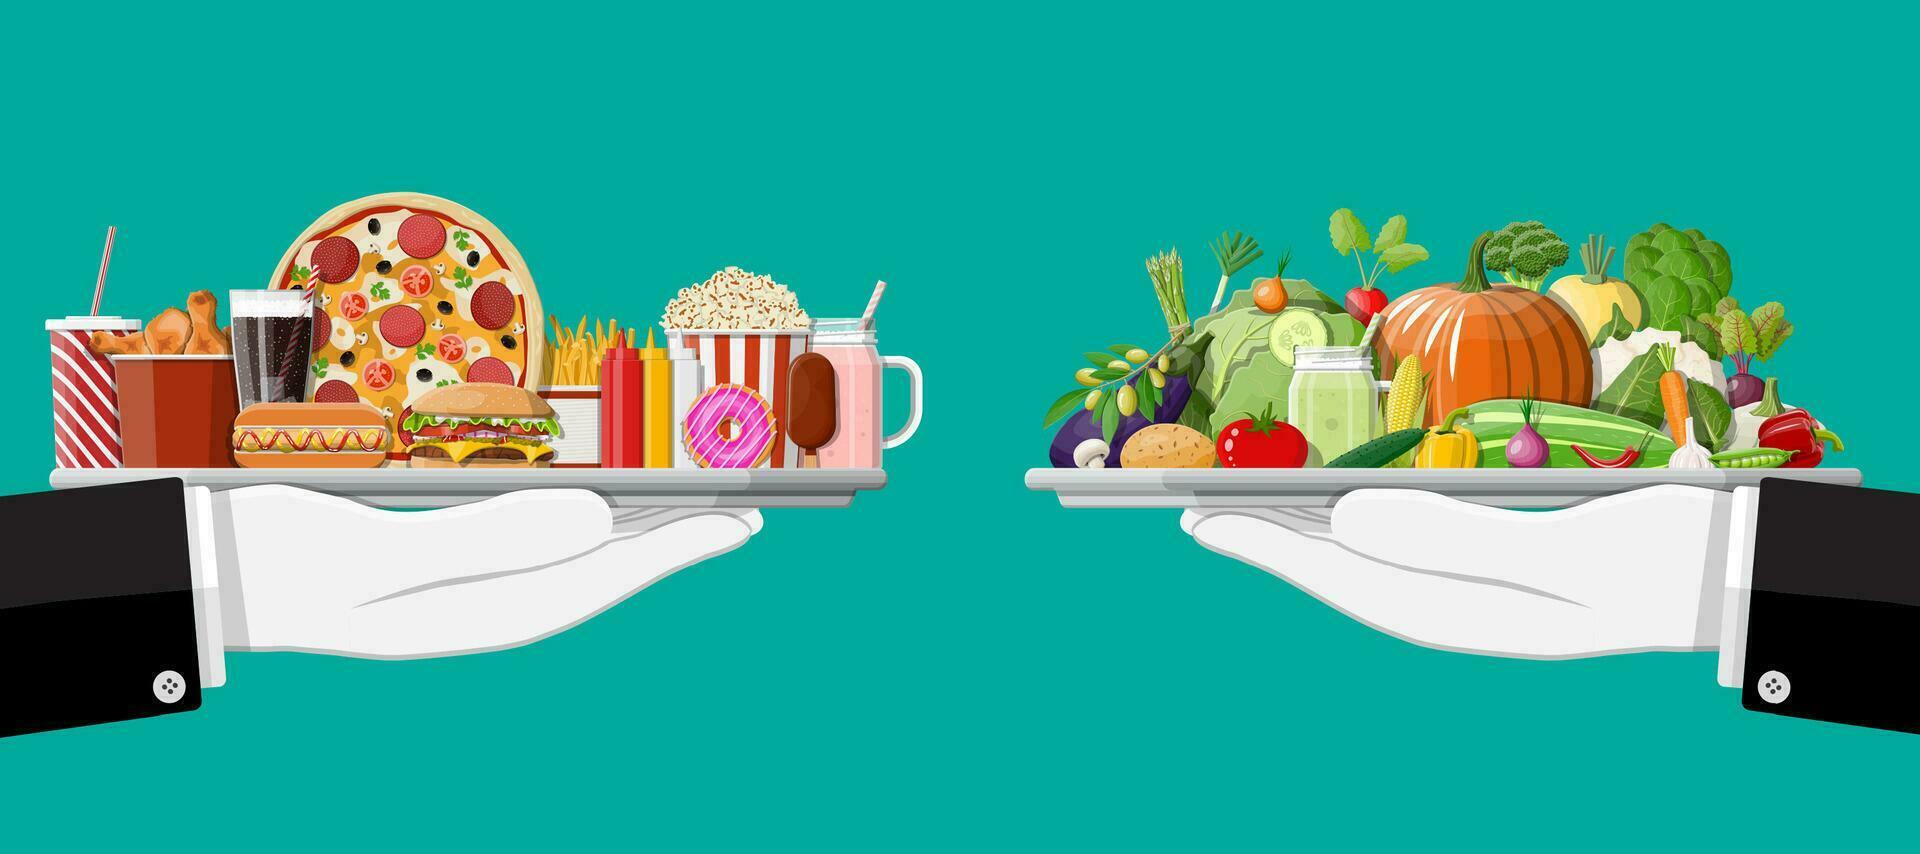 Tray with fast food and organic products. Diet, nutrition, fitness and weight loss or overweight and fat. Greasy cholesterol vs. vitamins from vegetables. Food choice. Flat vector illustration